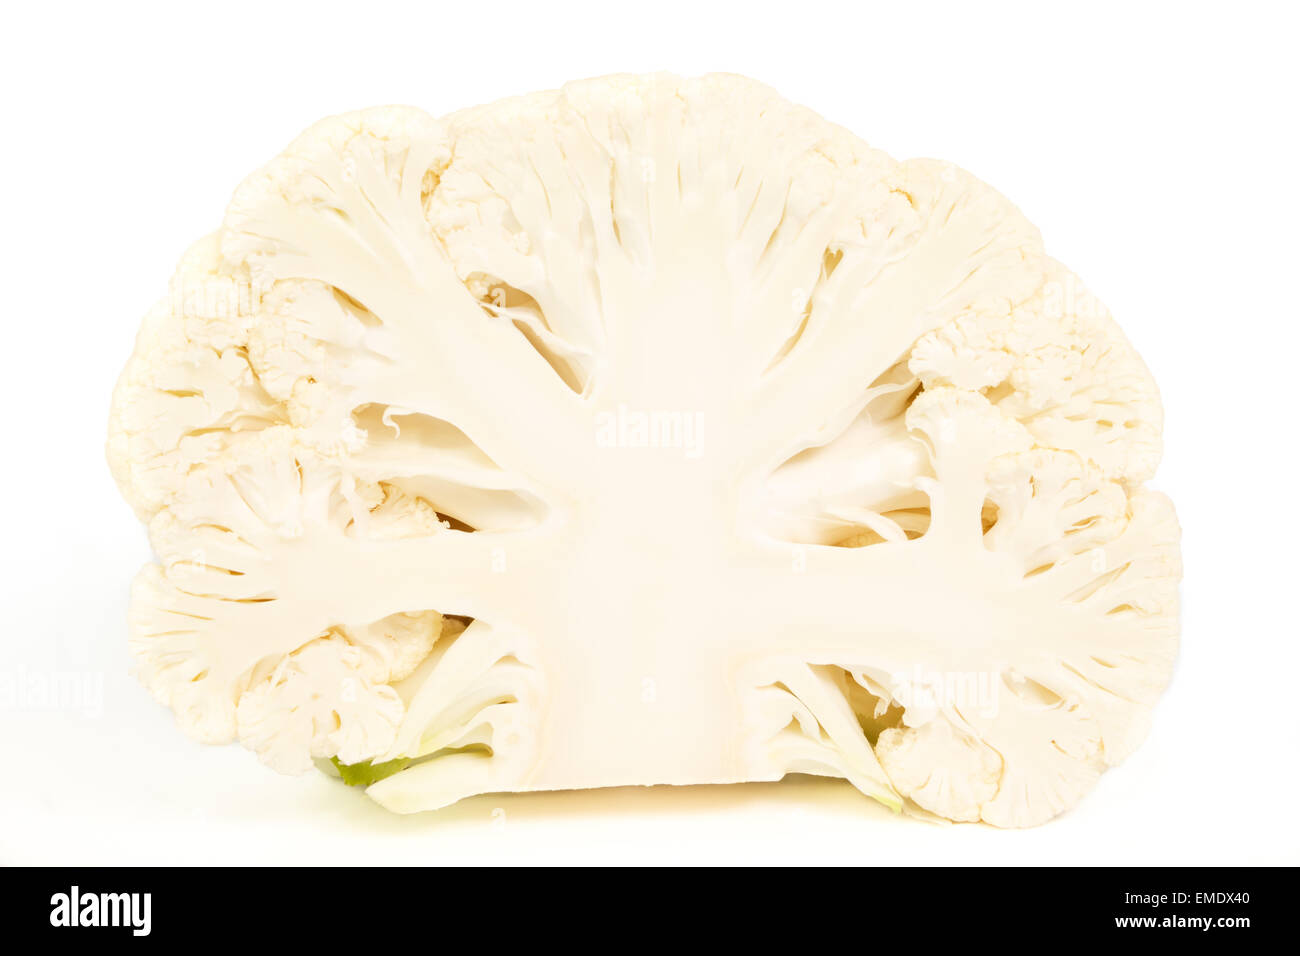 Half a cauliflower without leaves against white background Stock Photo